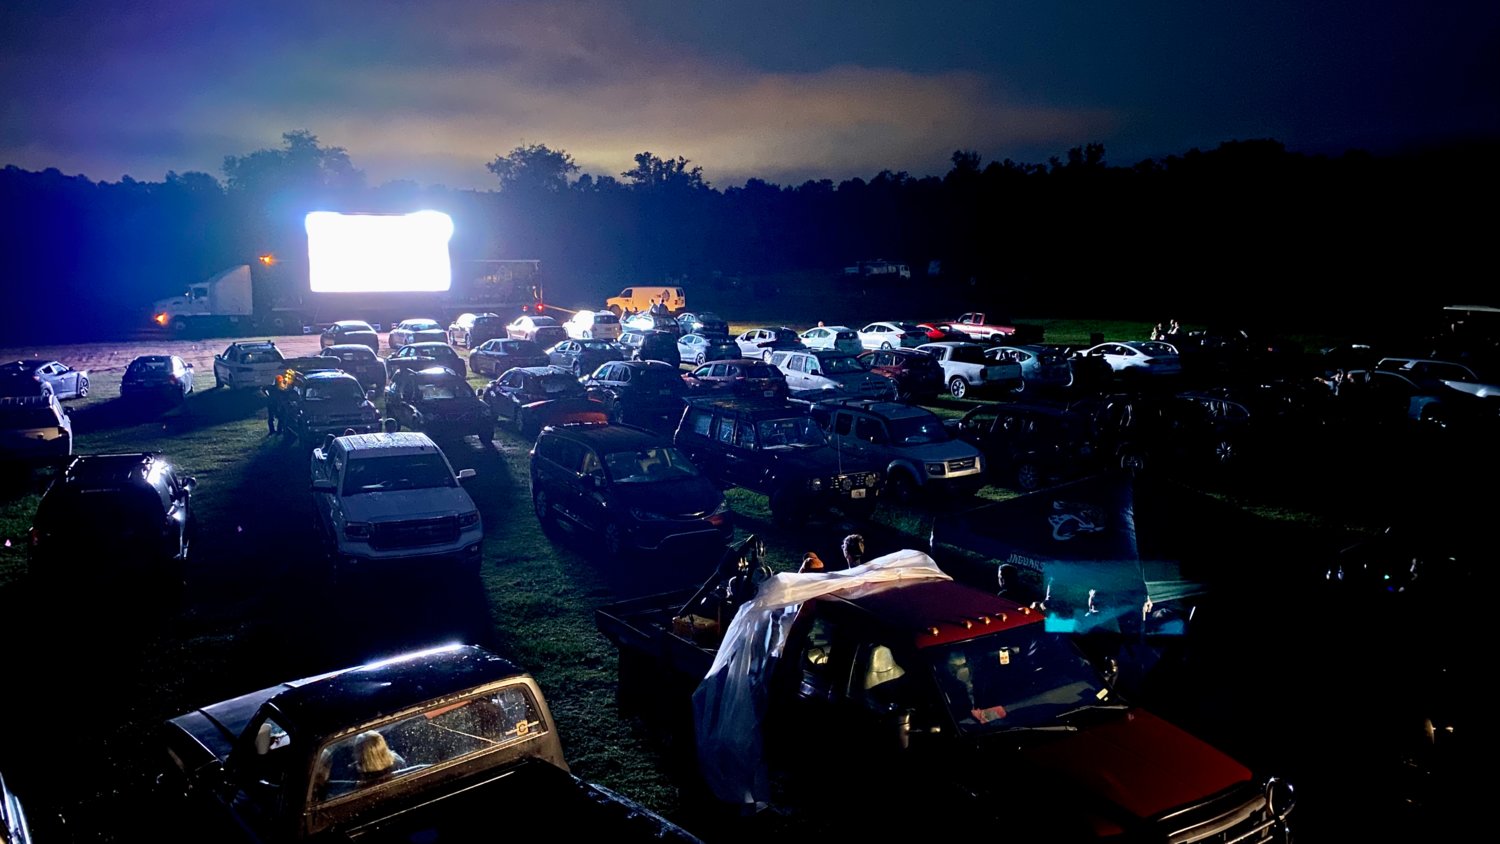 A Nod To Nostalgia Sun-ray Cinema Brings Back The Drive-in Theater To Deal With Pandemic The Ponte Vedra Recorder